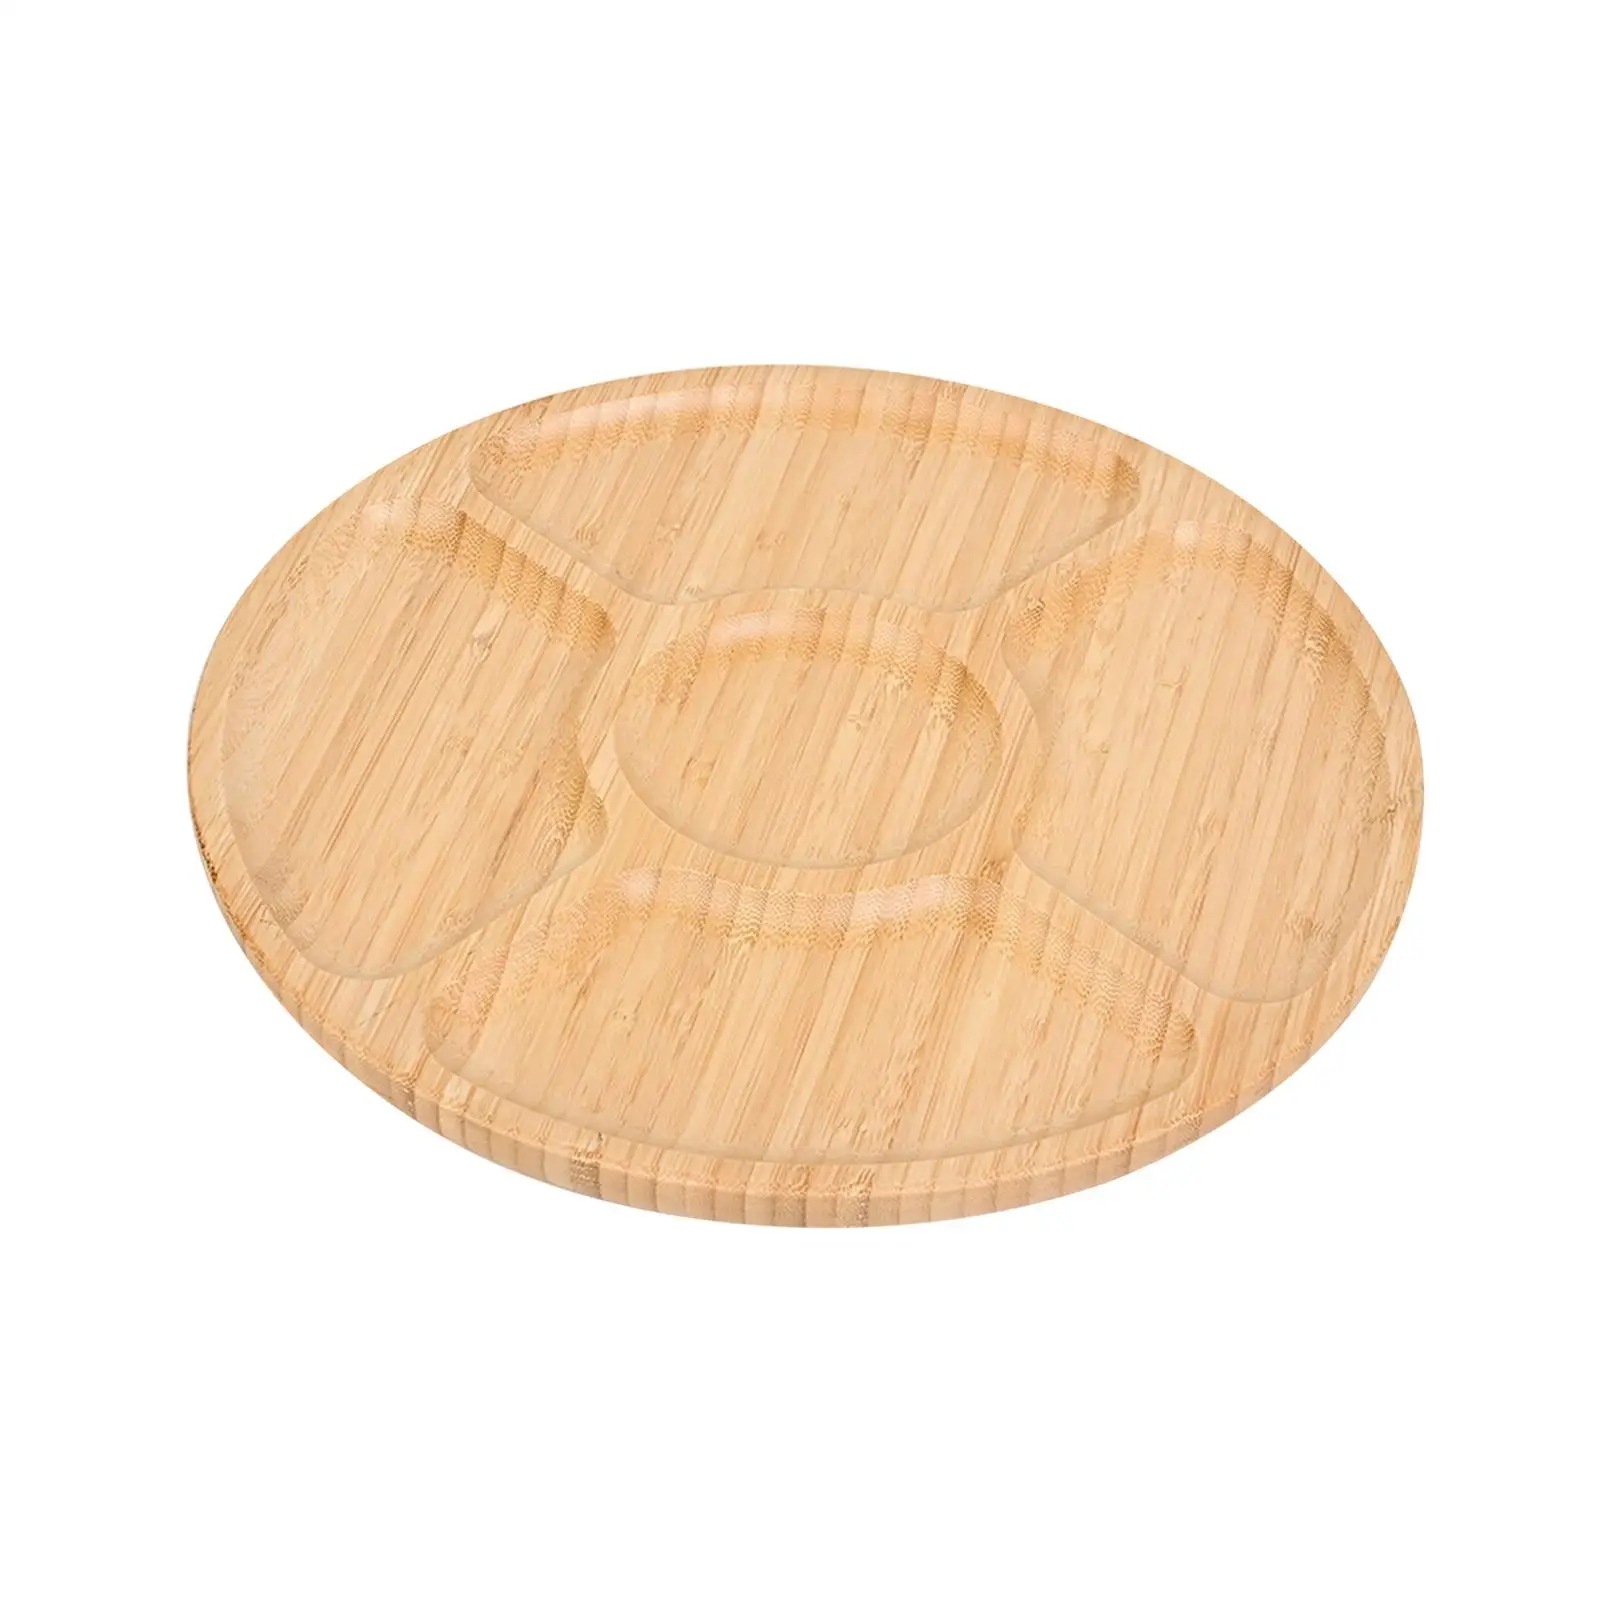 Wooden Tray Sectional Wooden Trays Family Dinner Display Cookware Wooden Food Tray for Appetizer Bread Wedding Party